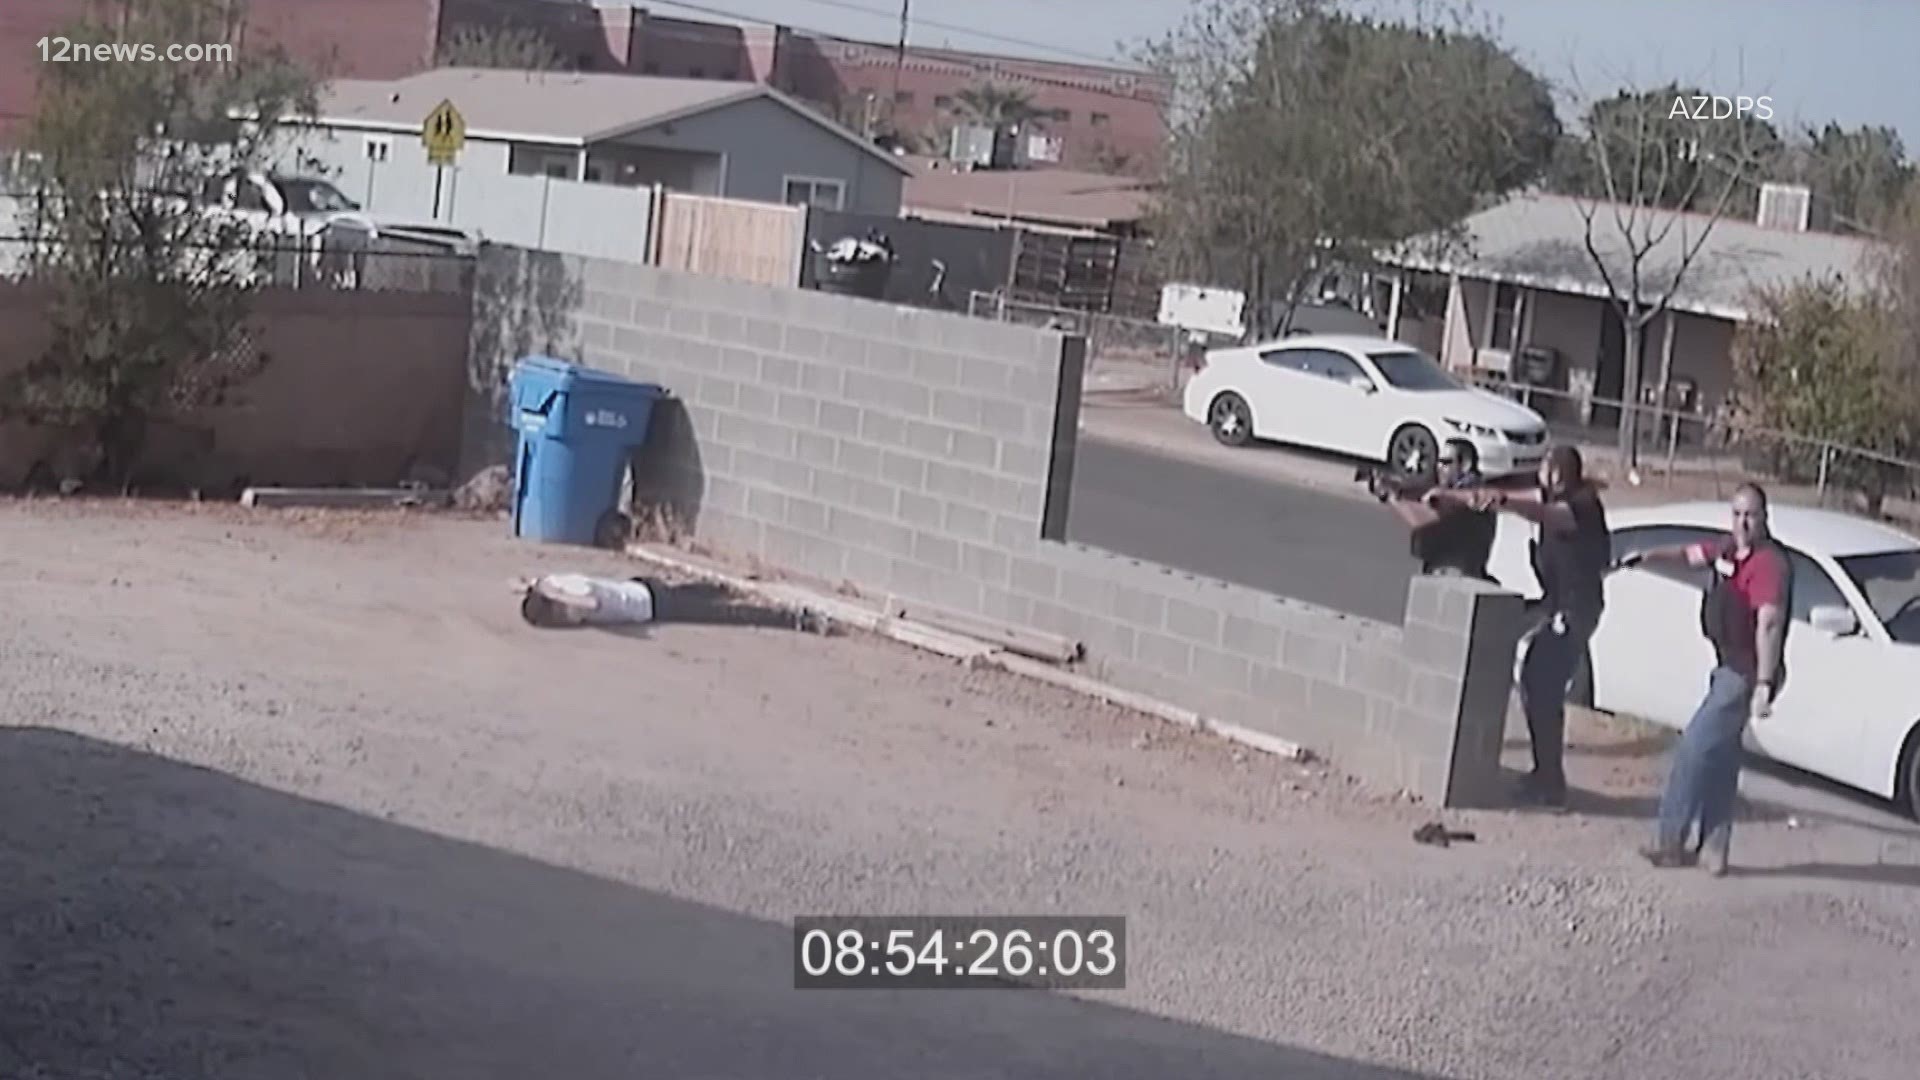 DPS released additional video from a September shooting when a teen shot at detectives in Phoenix with an assault rifle. DPS called it an "ambush-style" shooting.